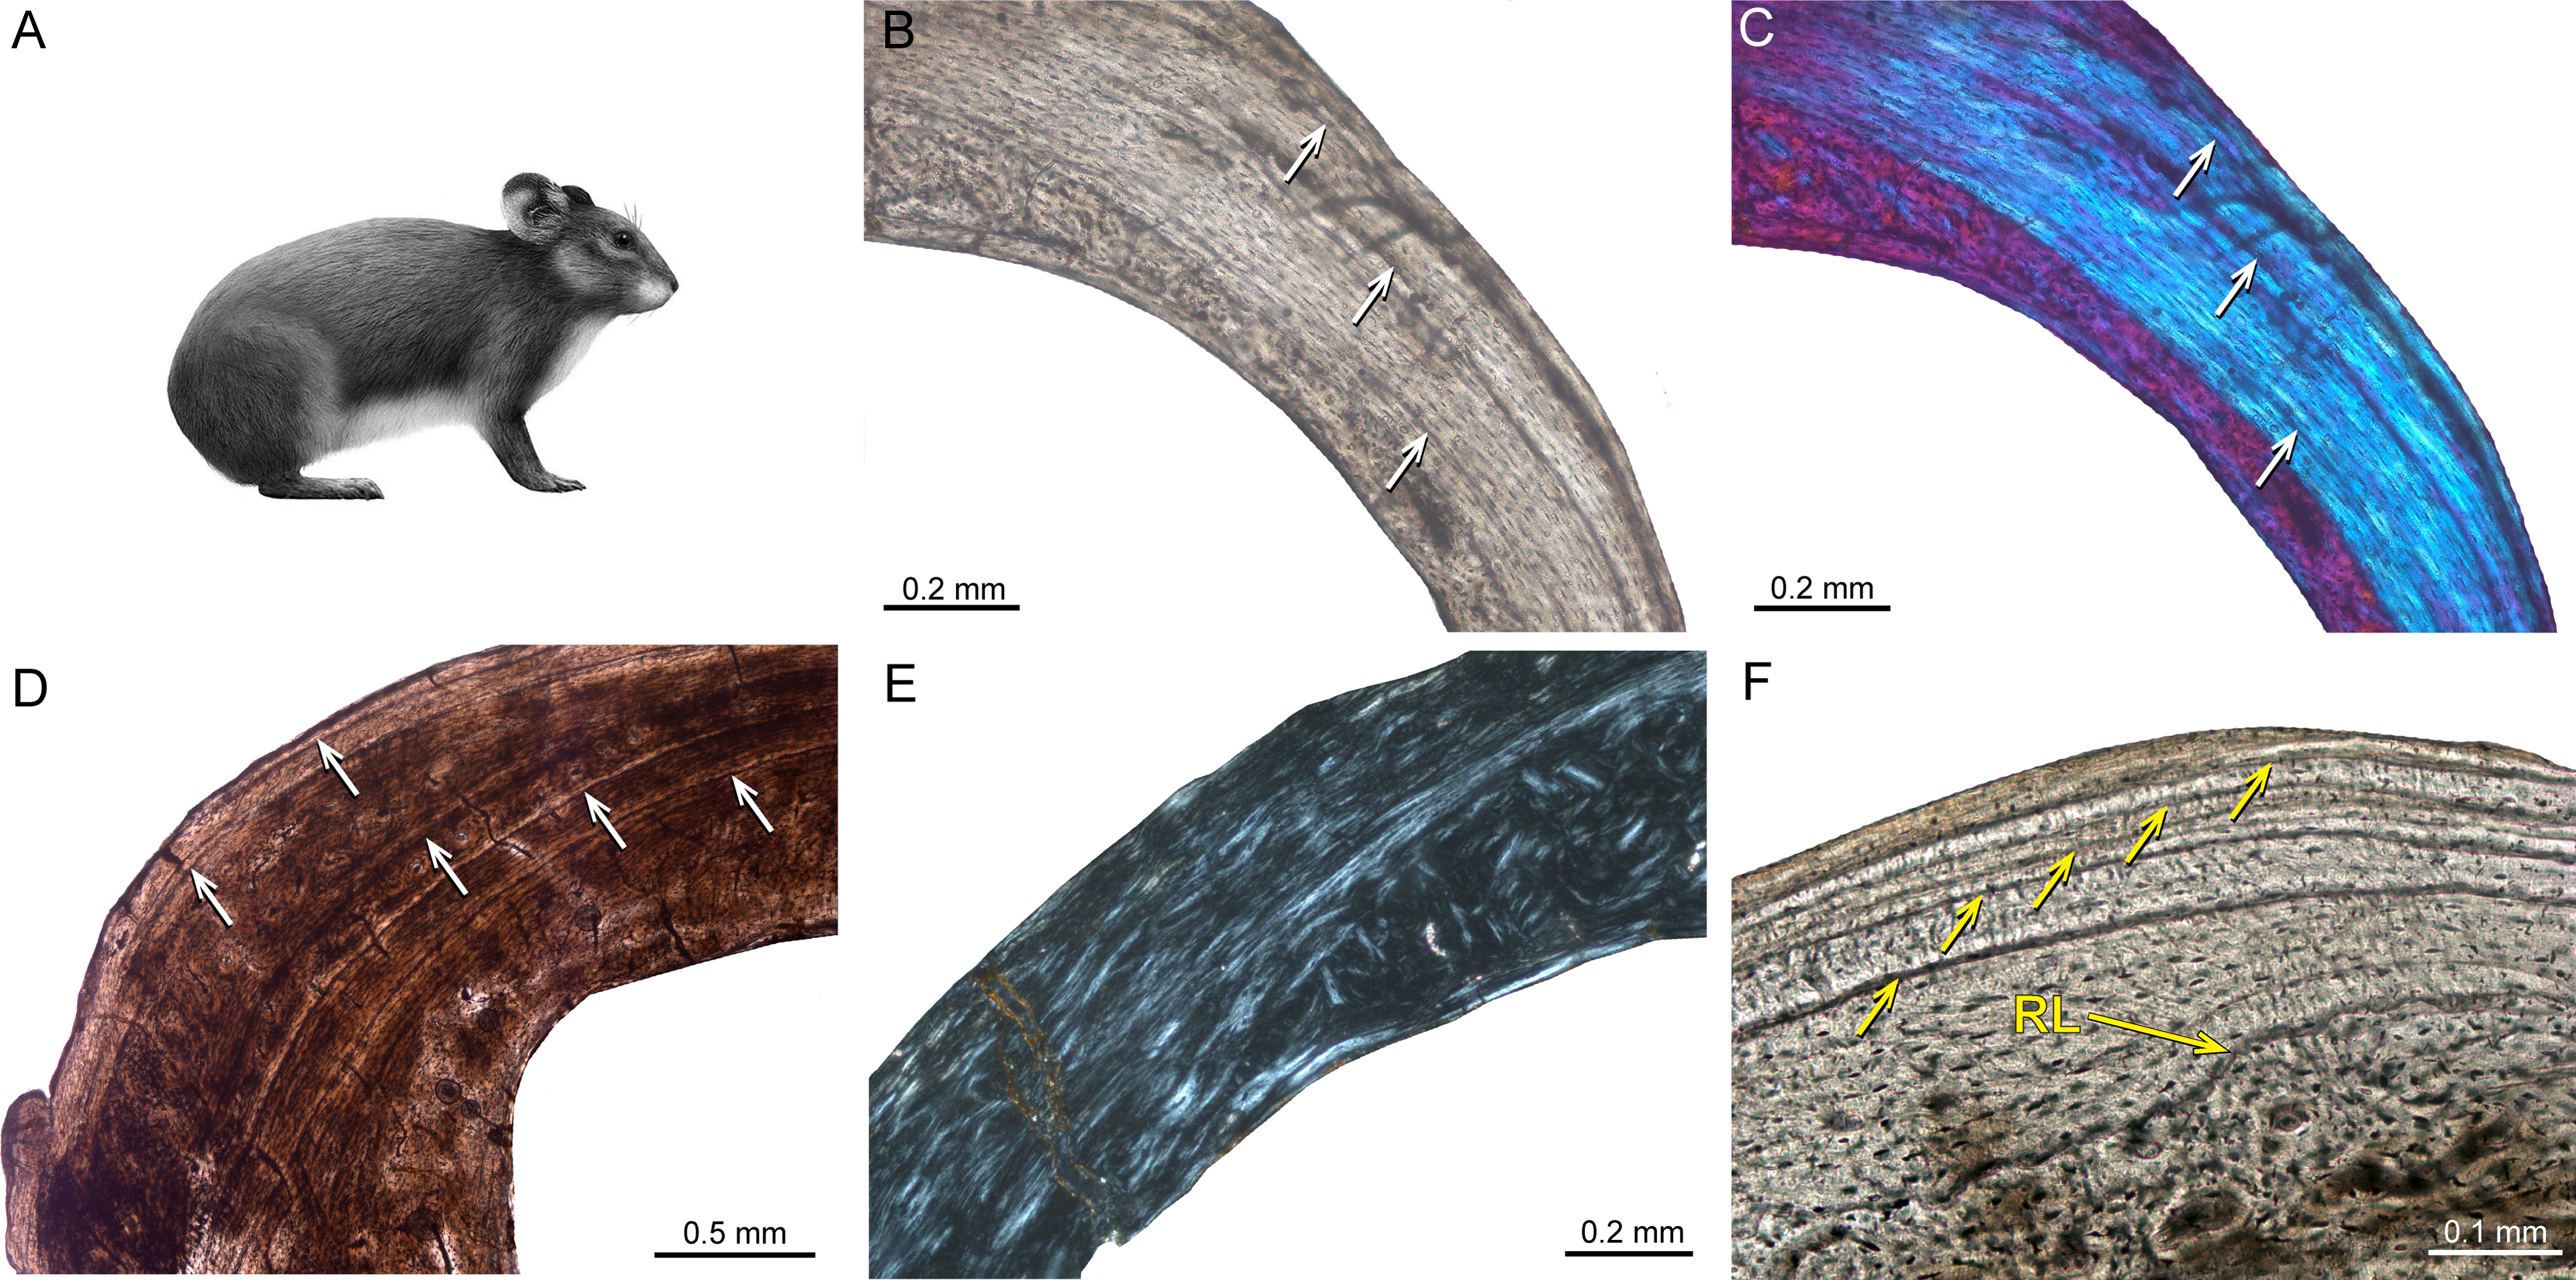 Histological features of Sinomegaceros yabei, the megacerine deer from